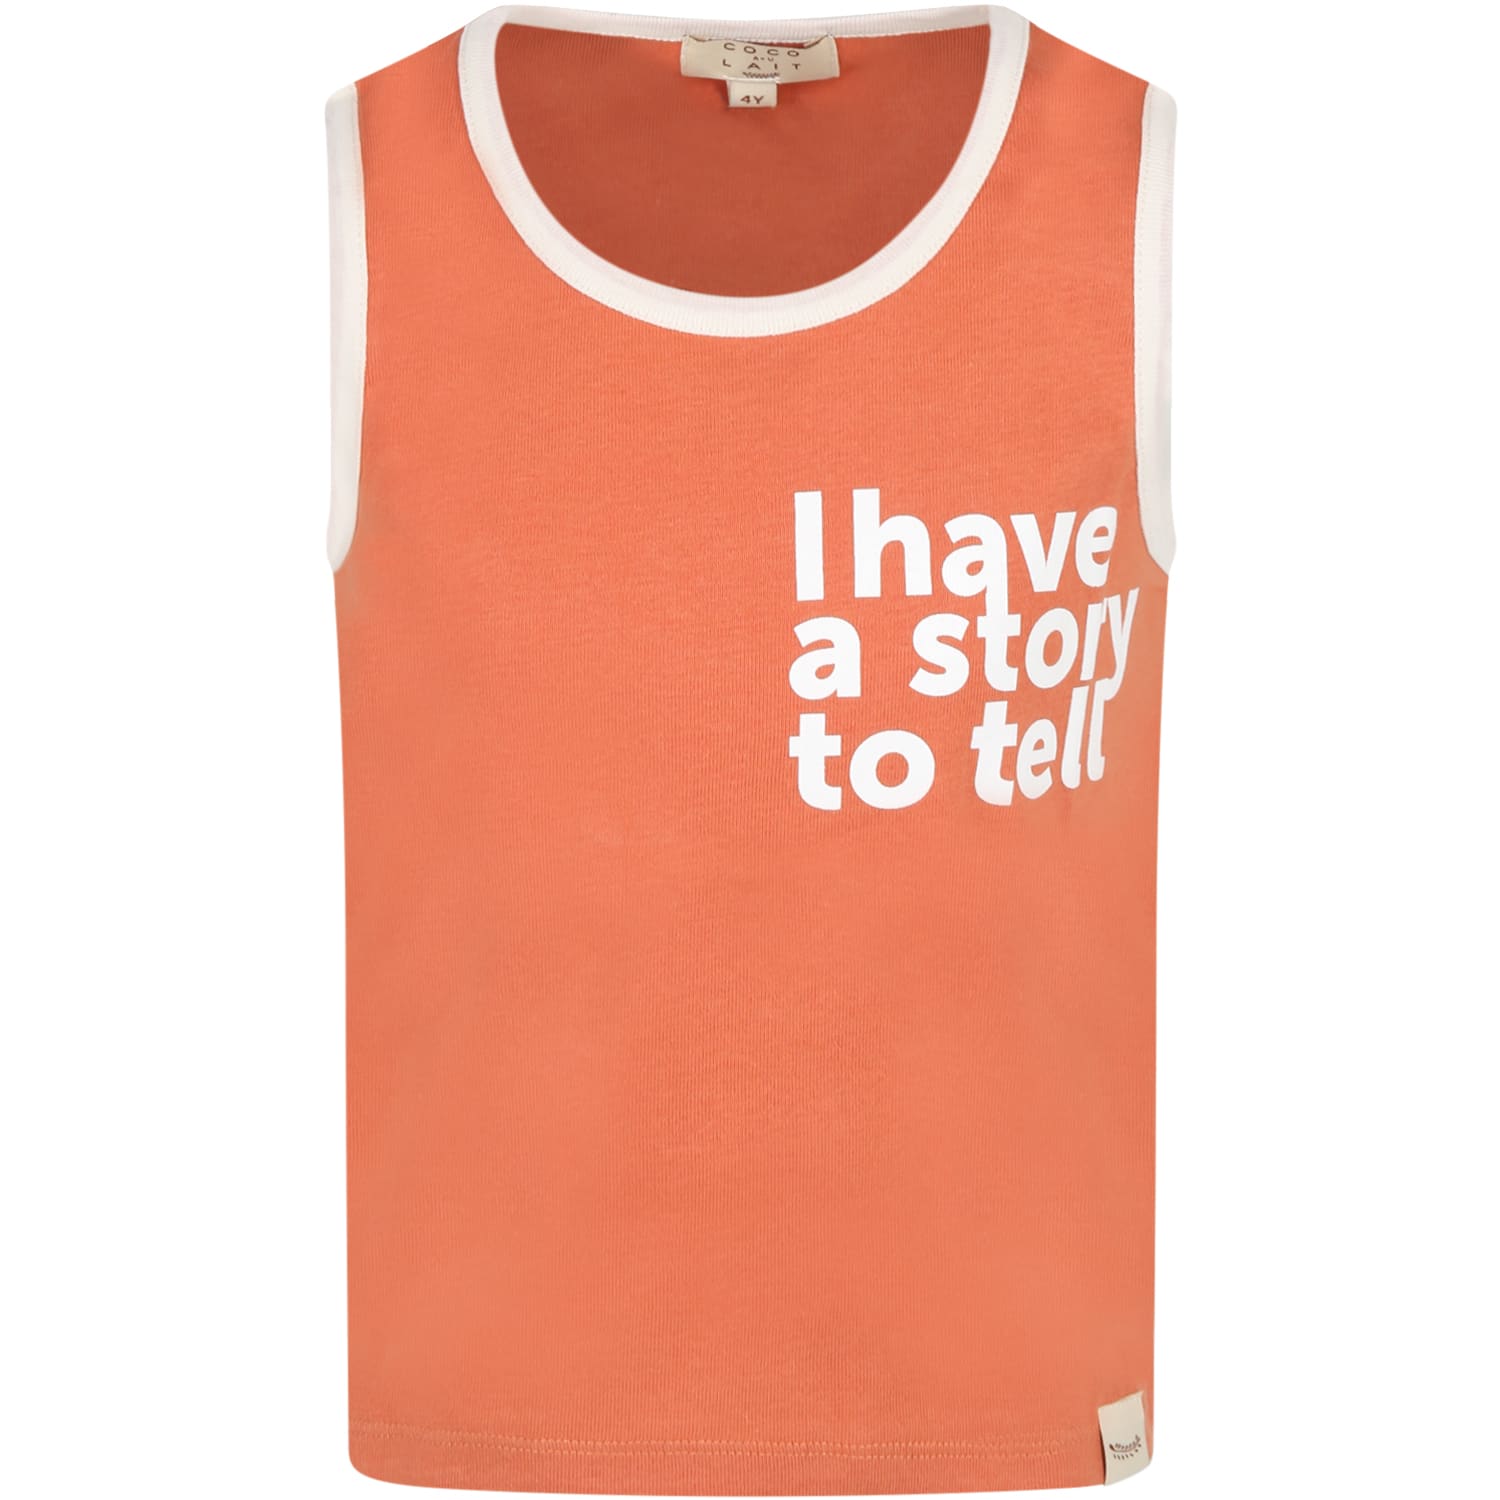 Coco Au Lait Orange Tank-top For Kids With White Writing